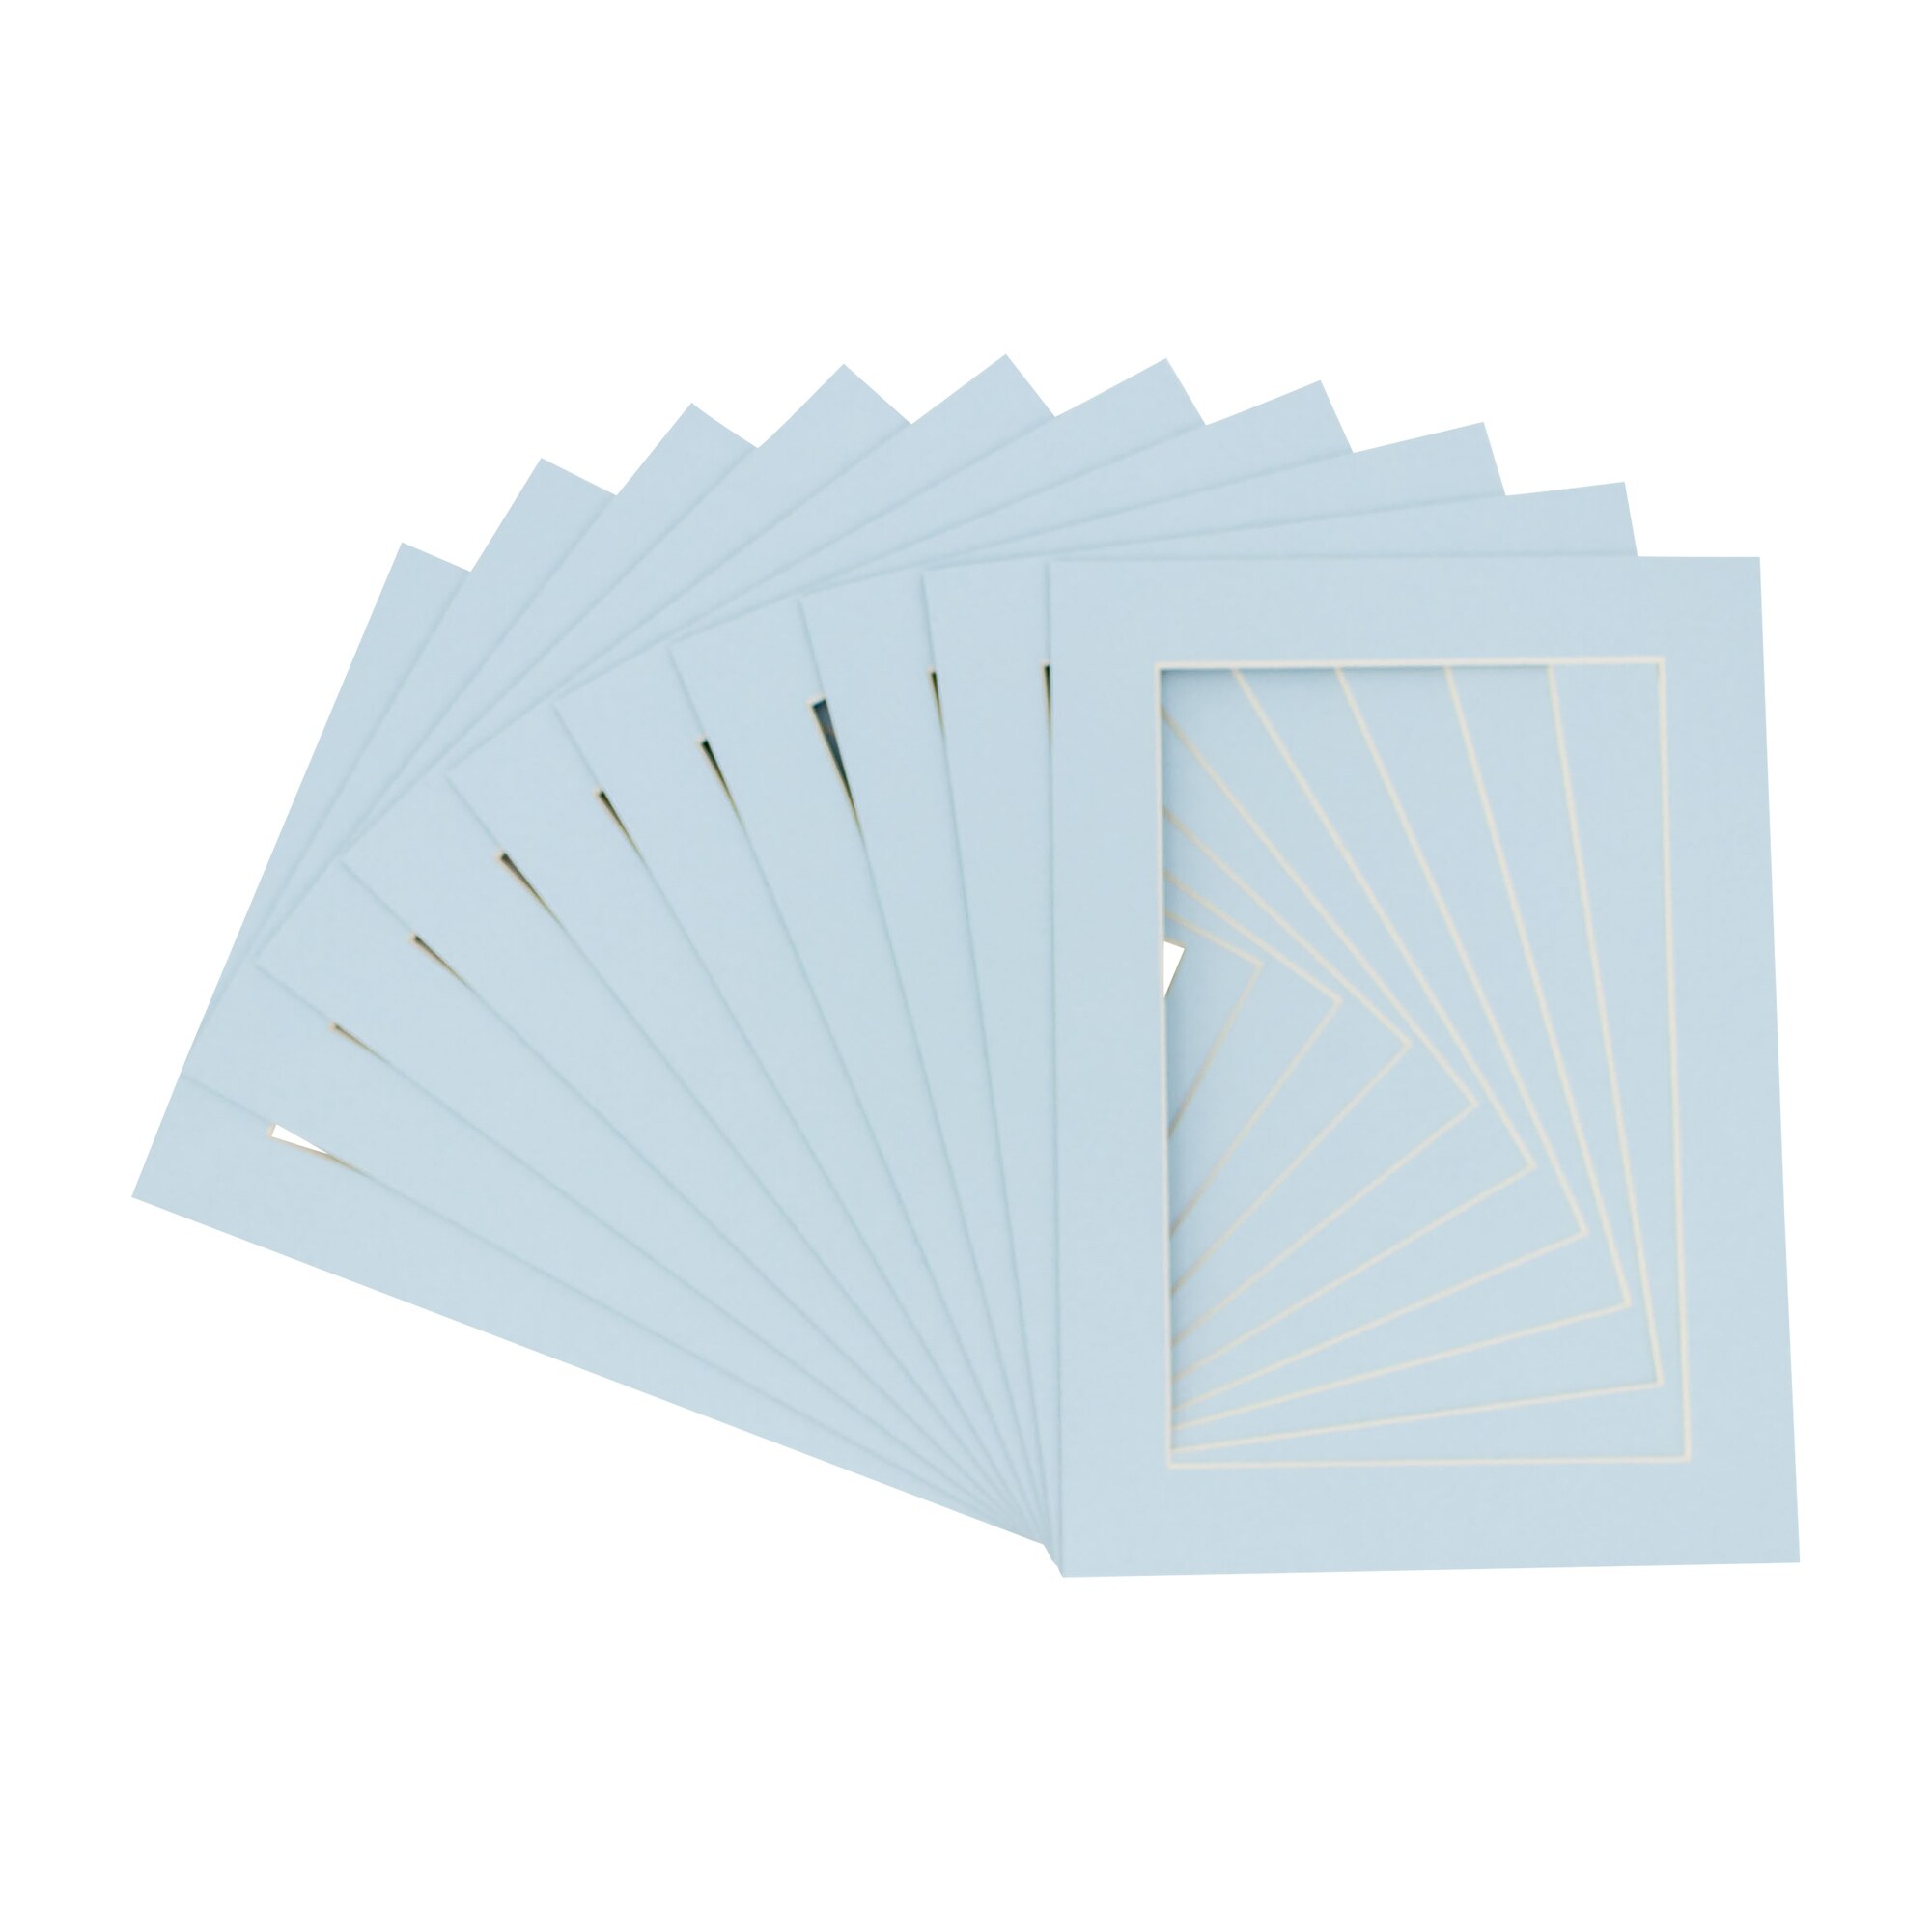 Pack of 10, 11x14 Photo Mats for 5x7 Picture Framing Acid Free 8-ply, White